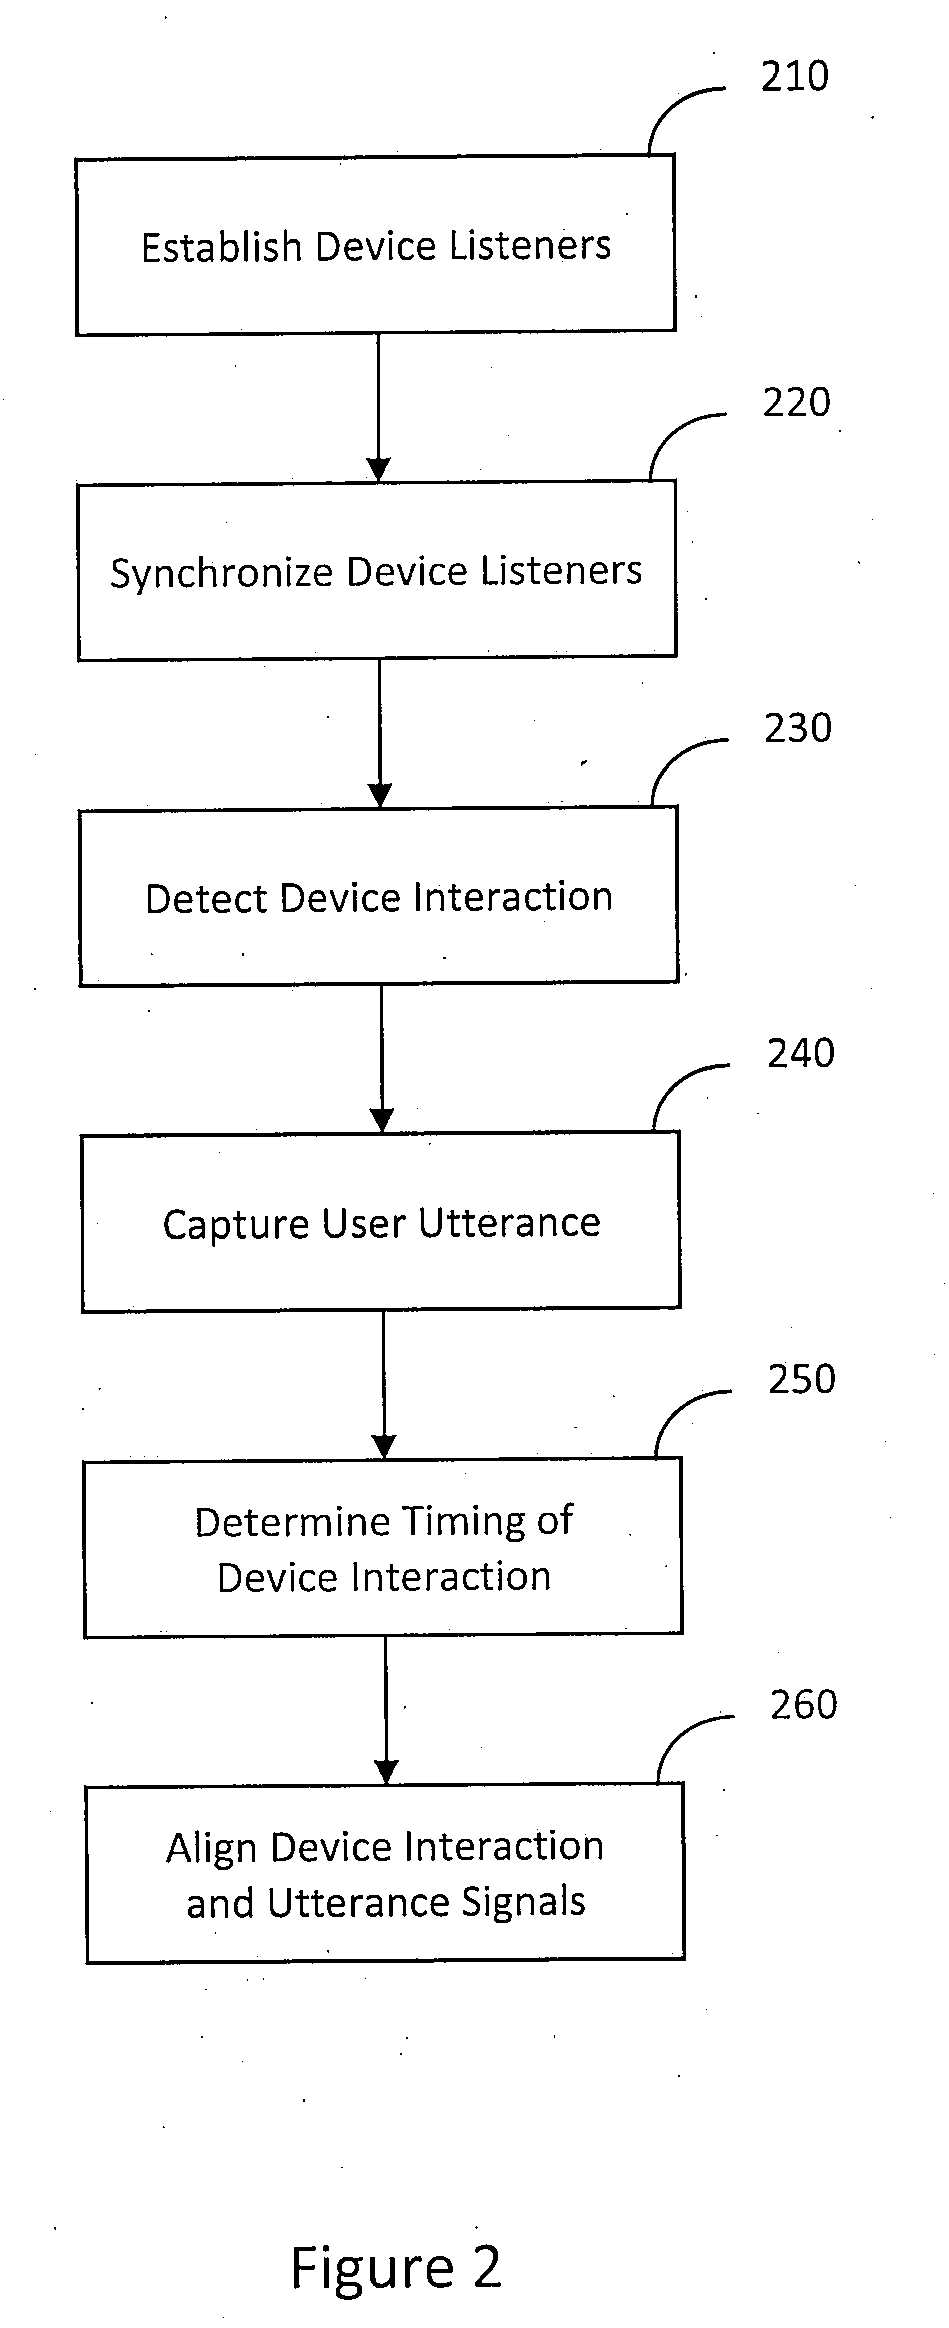 System and method for processing multi-modal device interactions in a natural language voice services environment